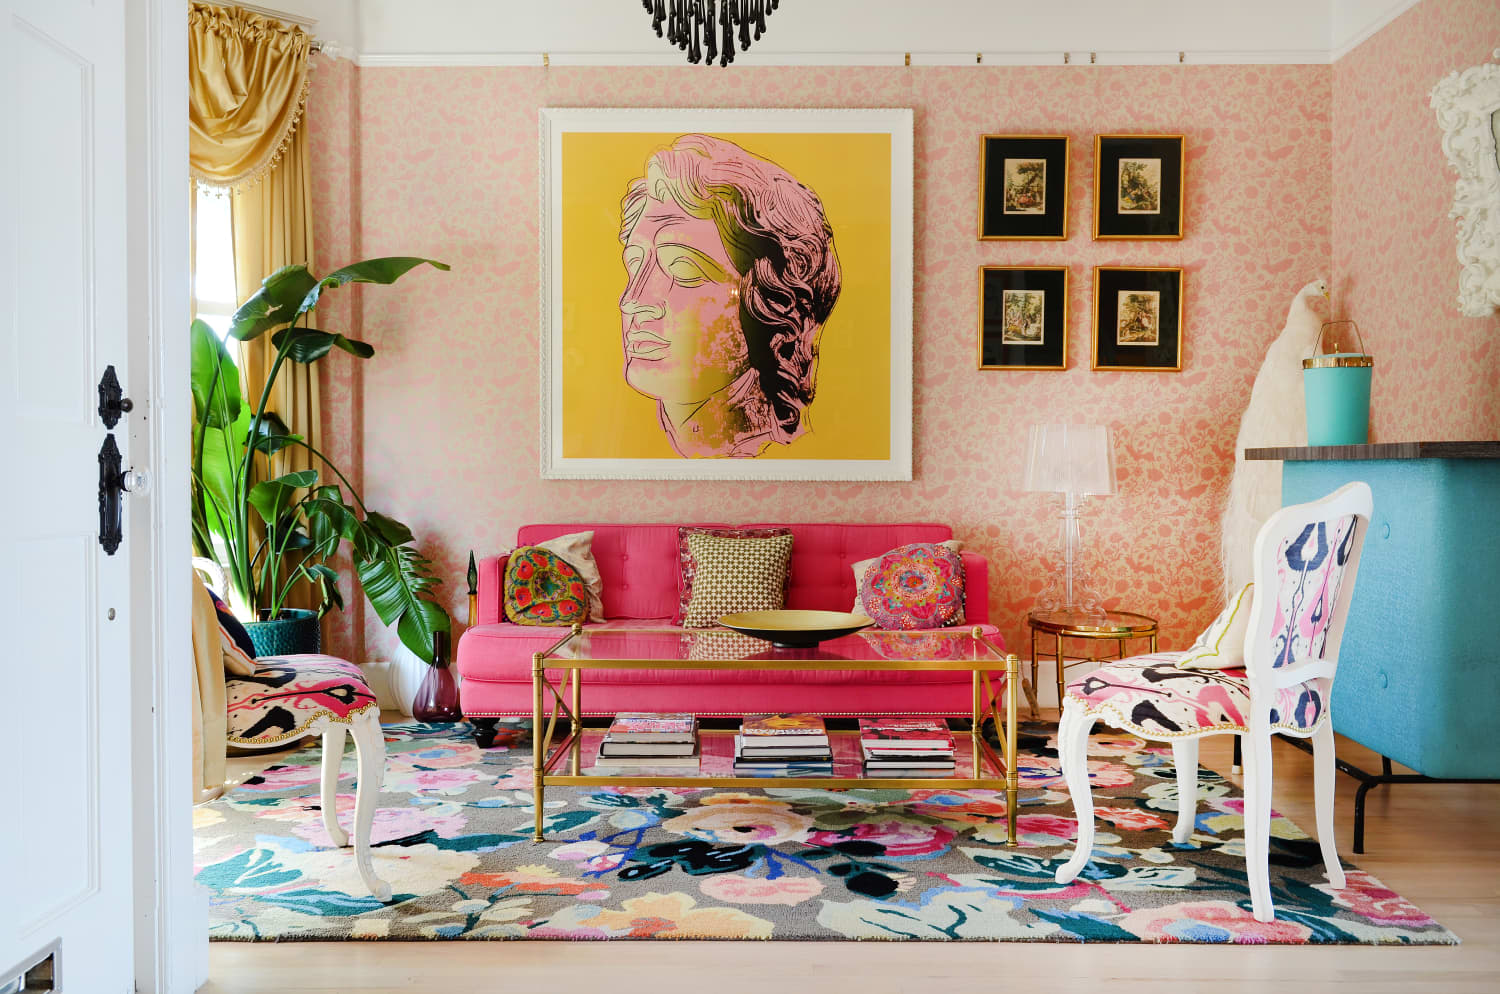 3 Designers Reveal the Home Decor Items Worth Splurging On